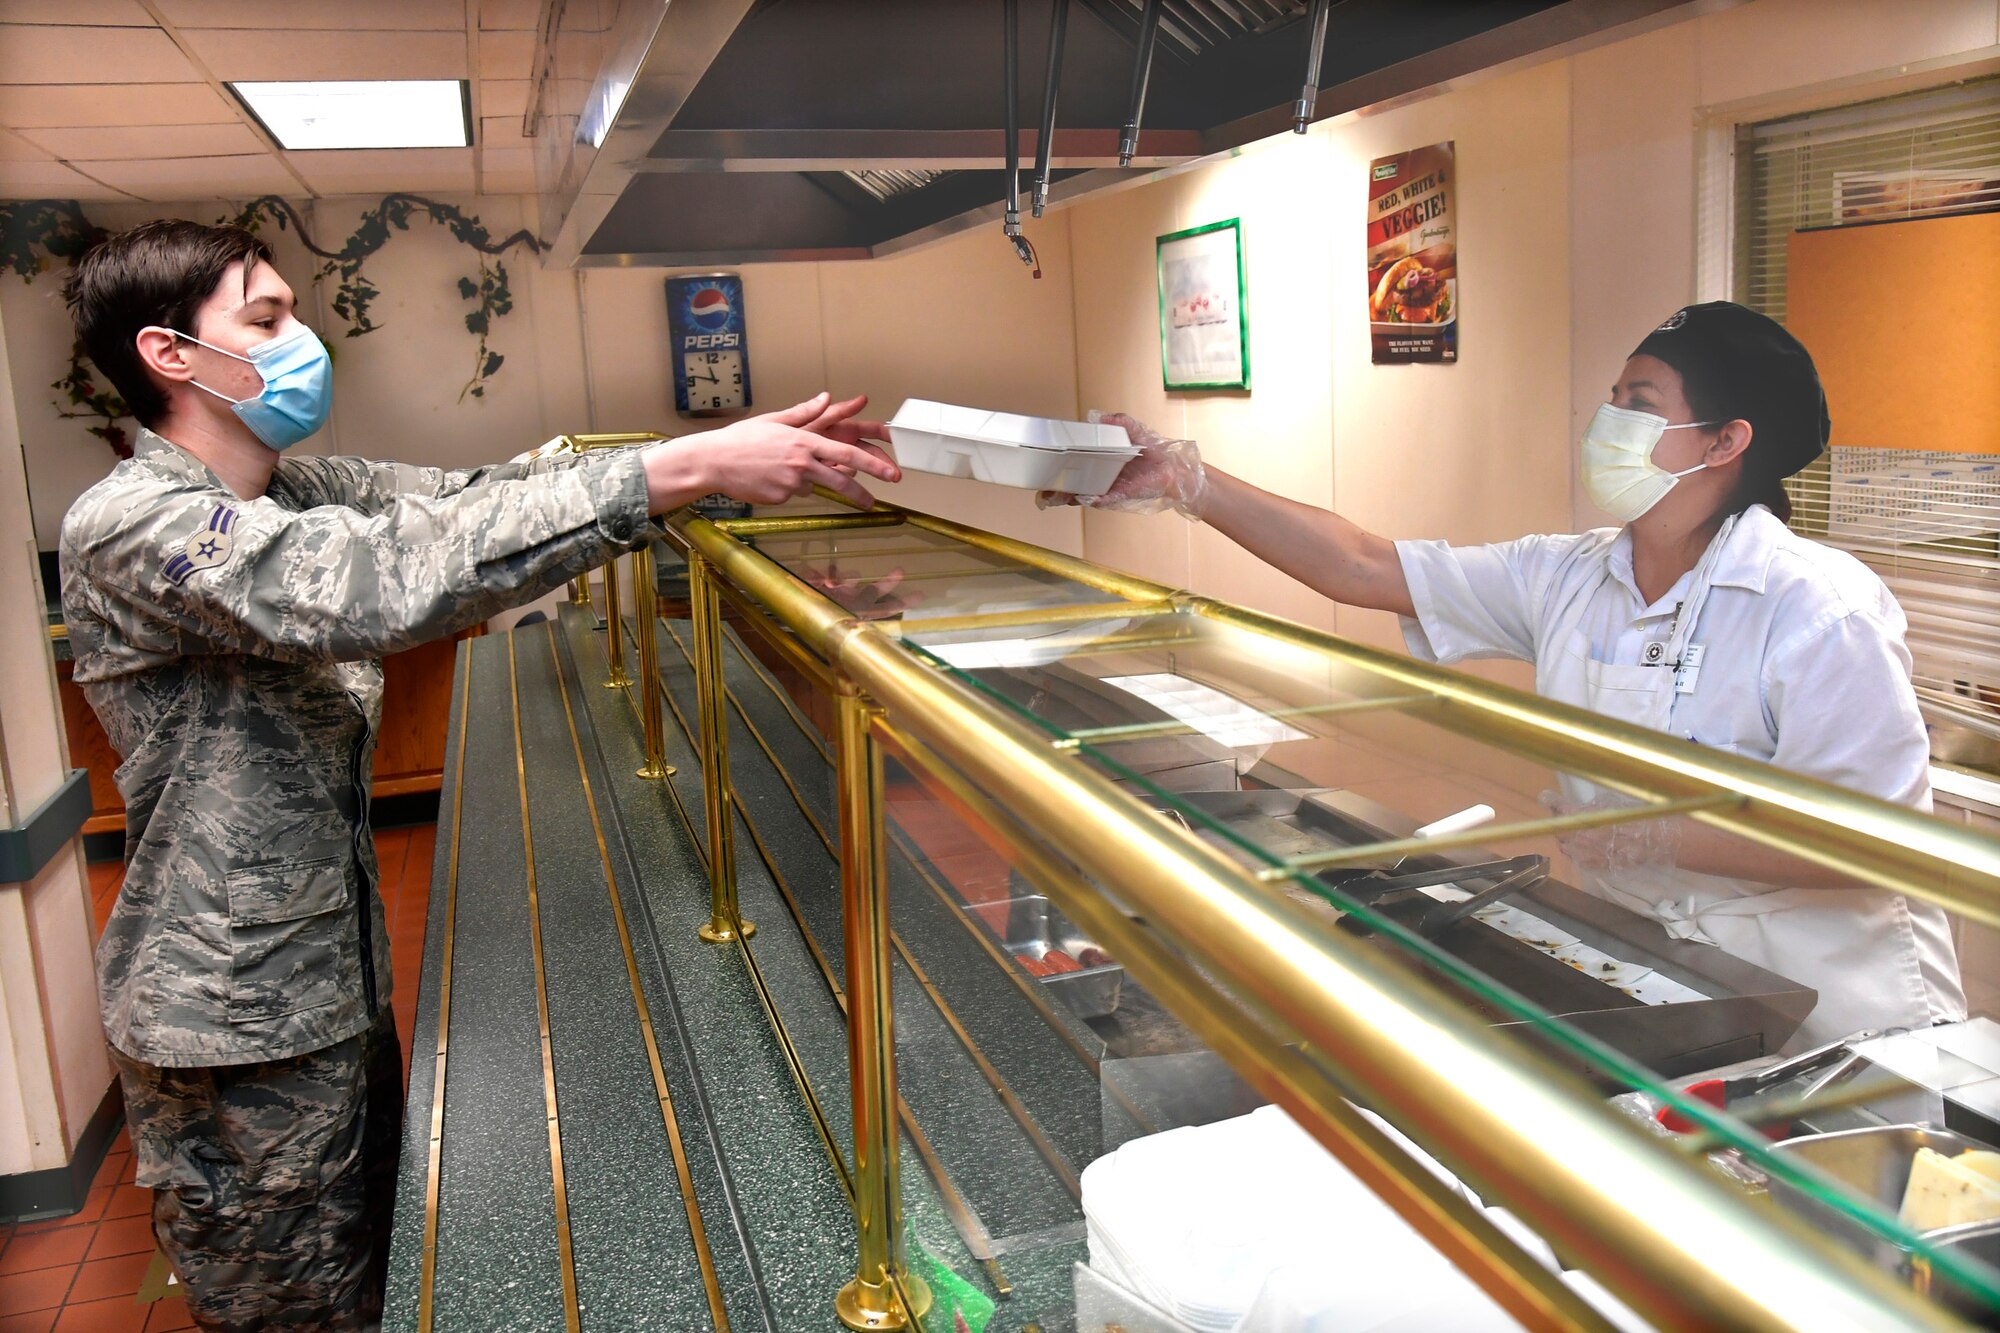 Airman 1st Class Logan Parent, 388th Aircraft Maintenance Squadron, is handed his lunch by Rosa Godinez, Hillcrest Dining Facility food services, at Hill Air Force Base, Utah, April 23, 2020. The food services contractor, Native Resource Development Company, Inc., is continuing to provide carry out meals for the base’s Airmen during the COVID-19 pandemic while keeping the dining facility extra clean and sanitized. (U.S. Air Force photo by Todd Cromar)